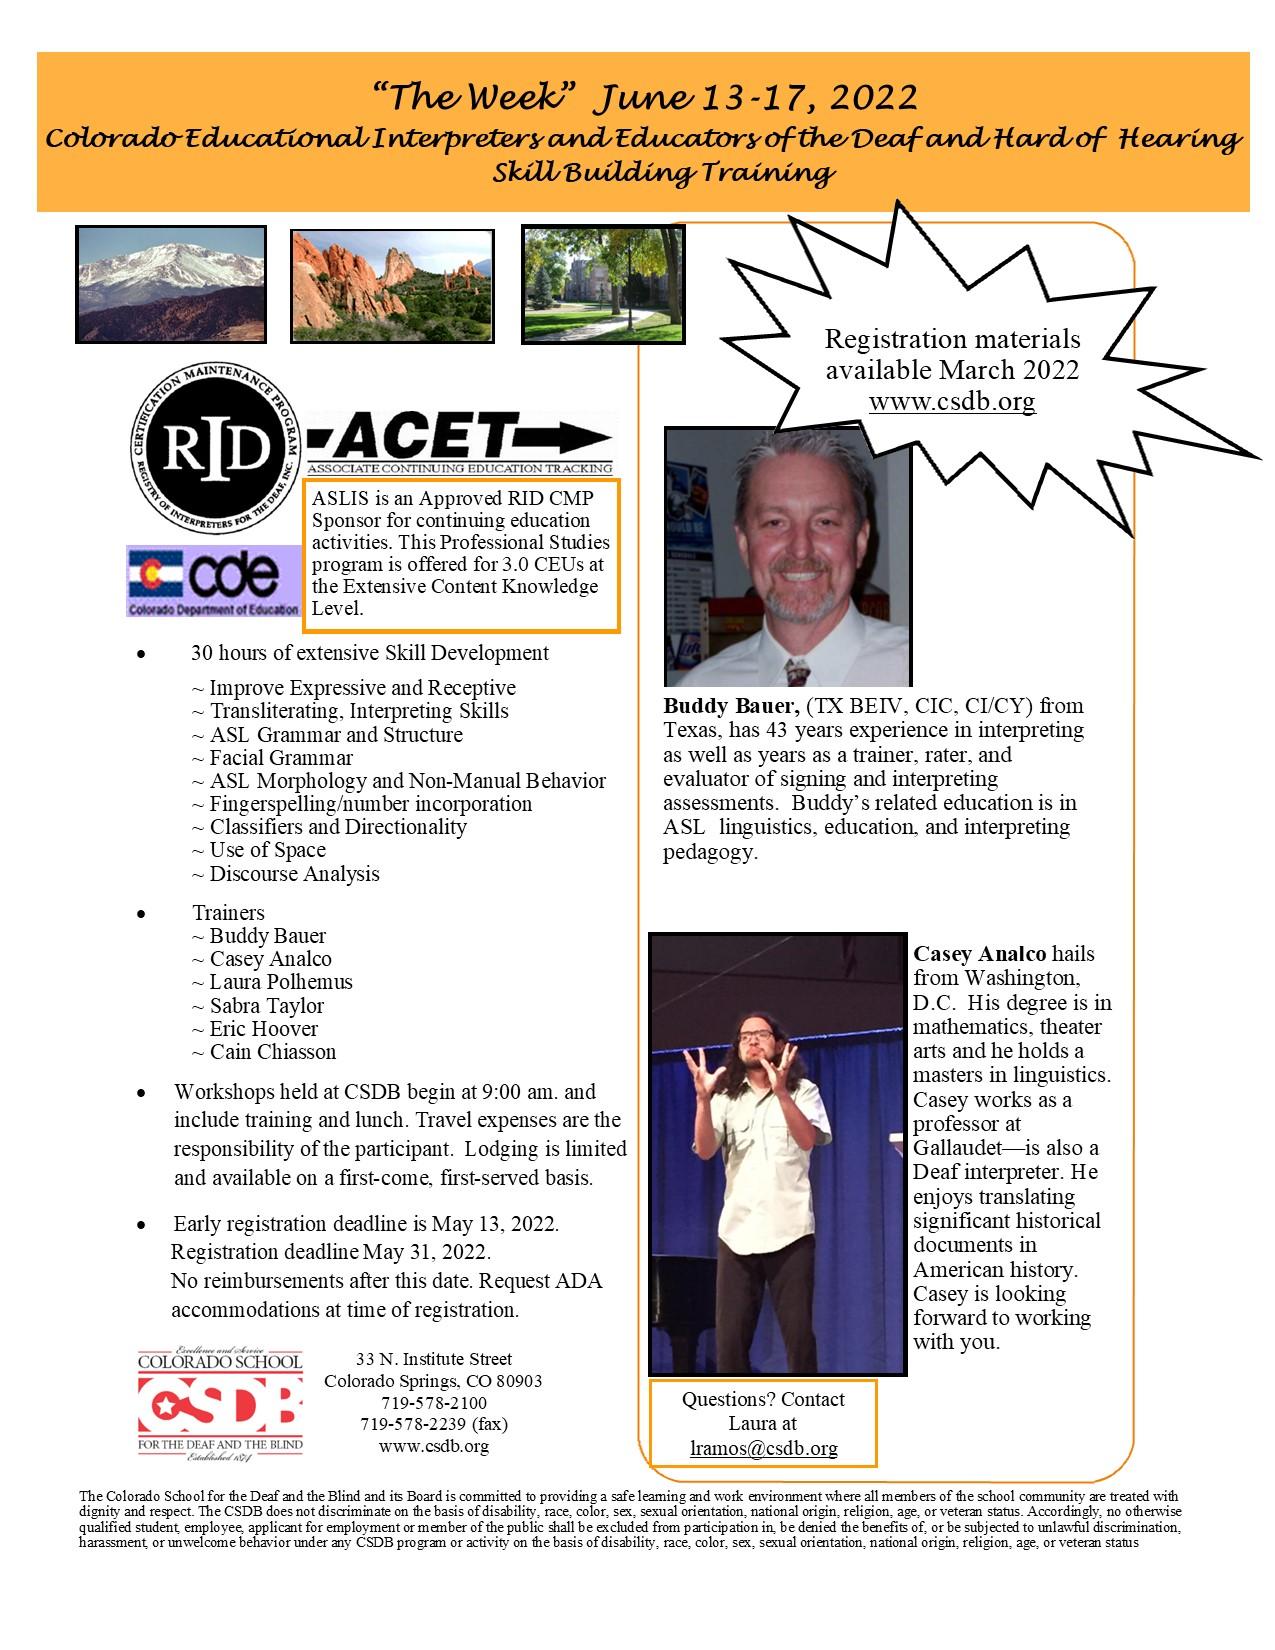 The Week June 13-17, 2022 Colorado Educational Interpreters and Teachers of the Deaf and Hard of Hearing Skill Building Training